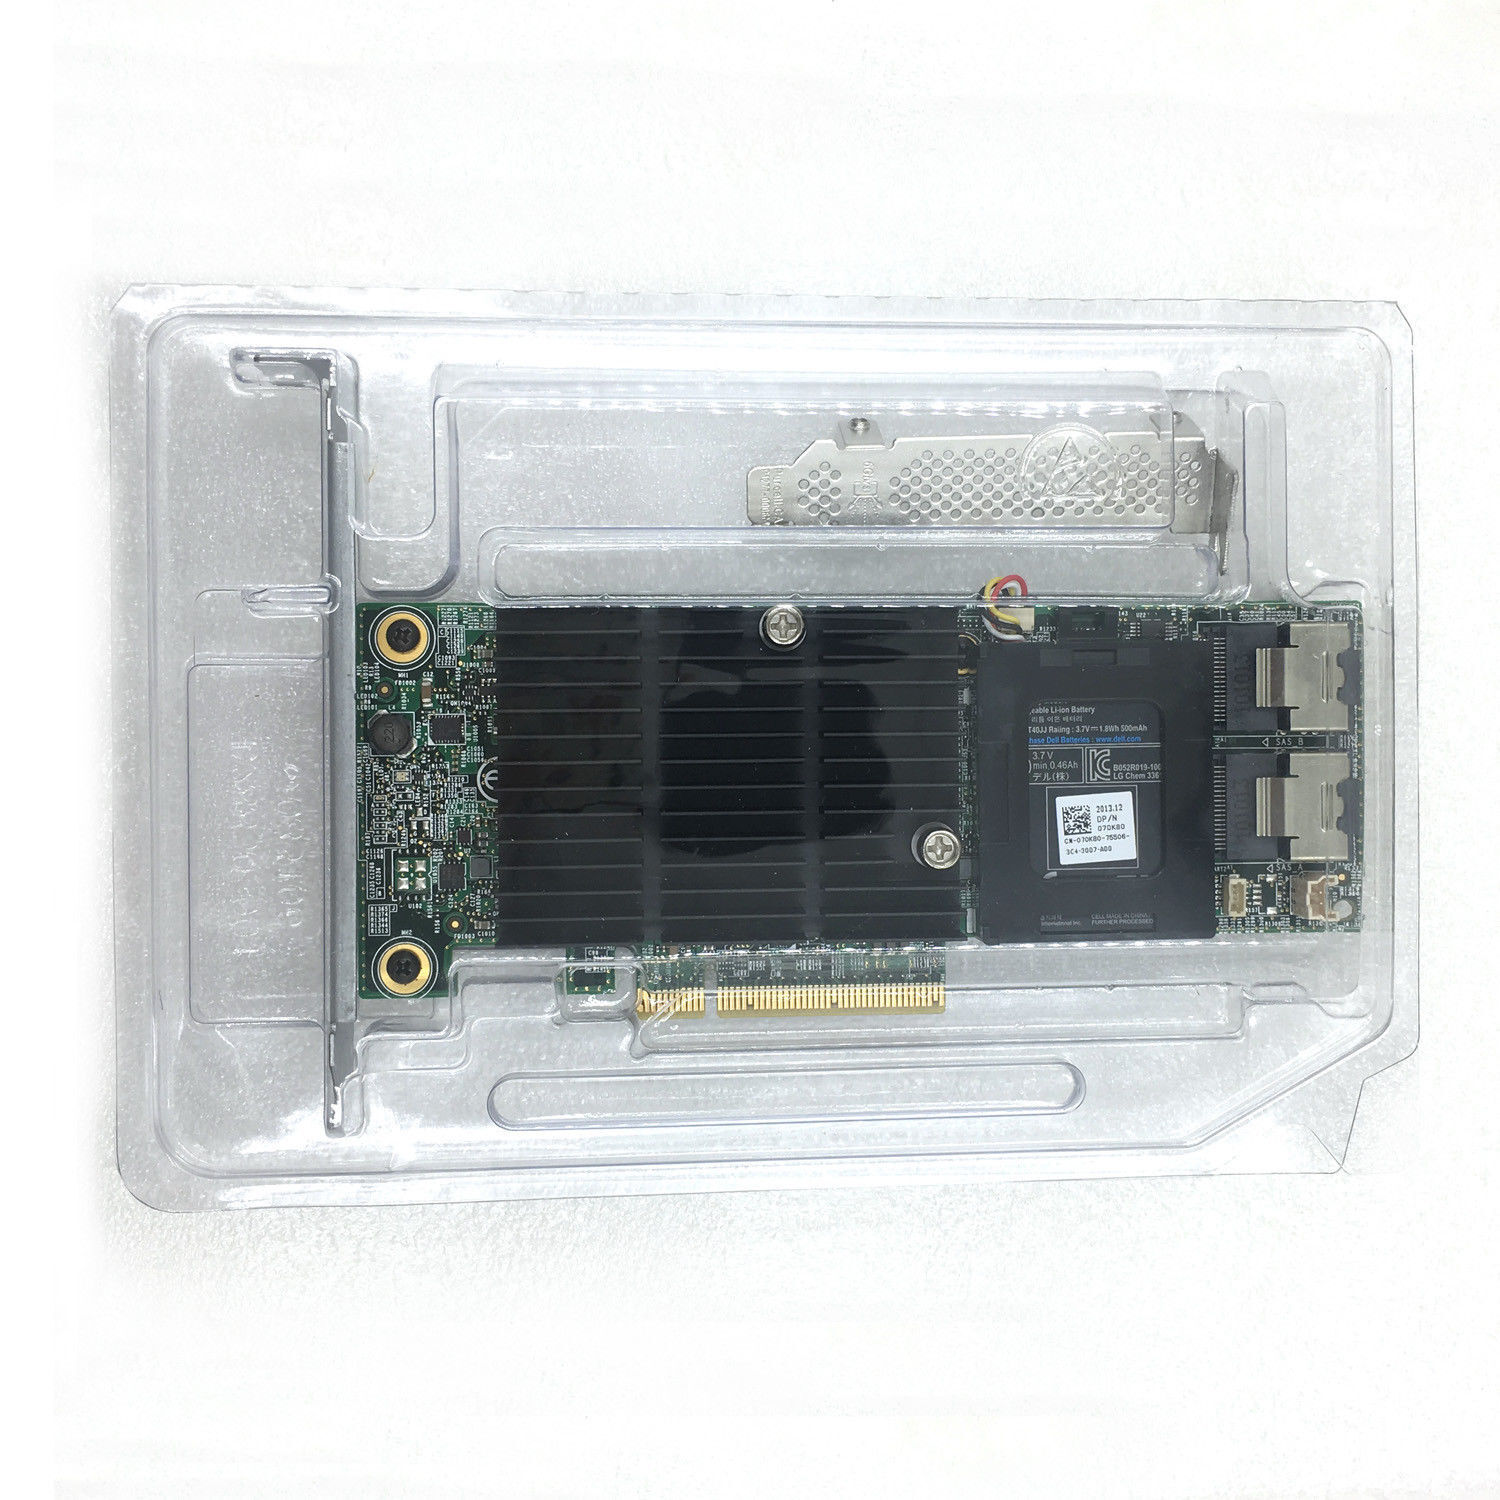 DELL PERC H710 ADAPTER 512MB CACHE 6Gbp/s SAS controller raid PCIE US seller